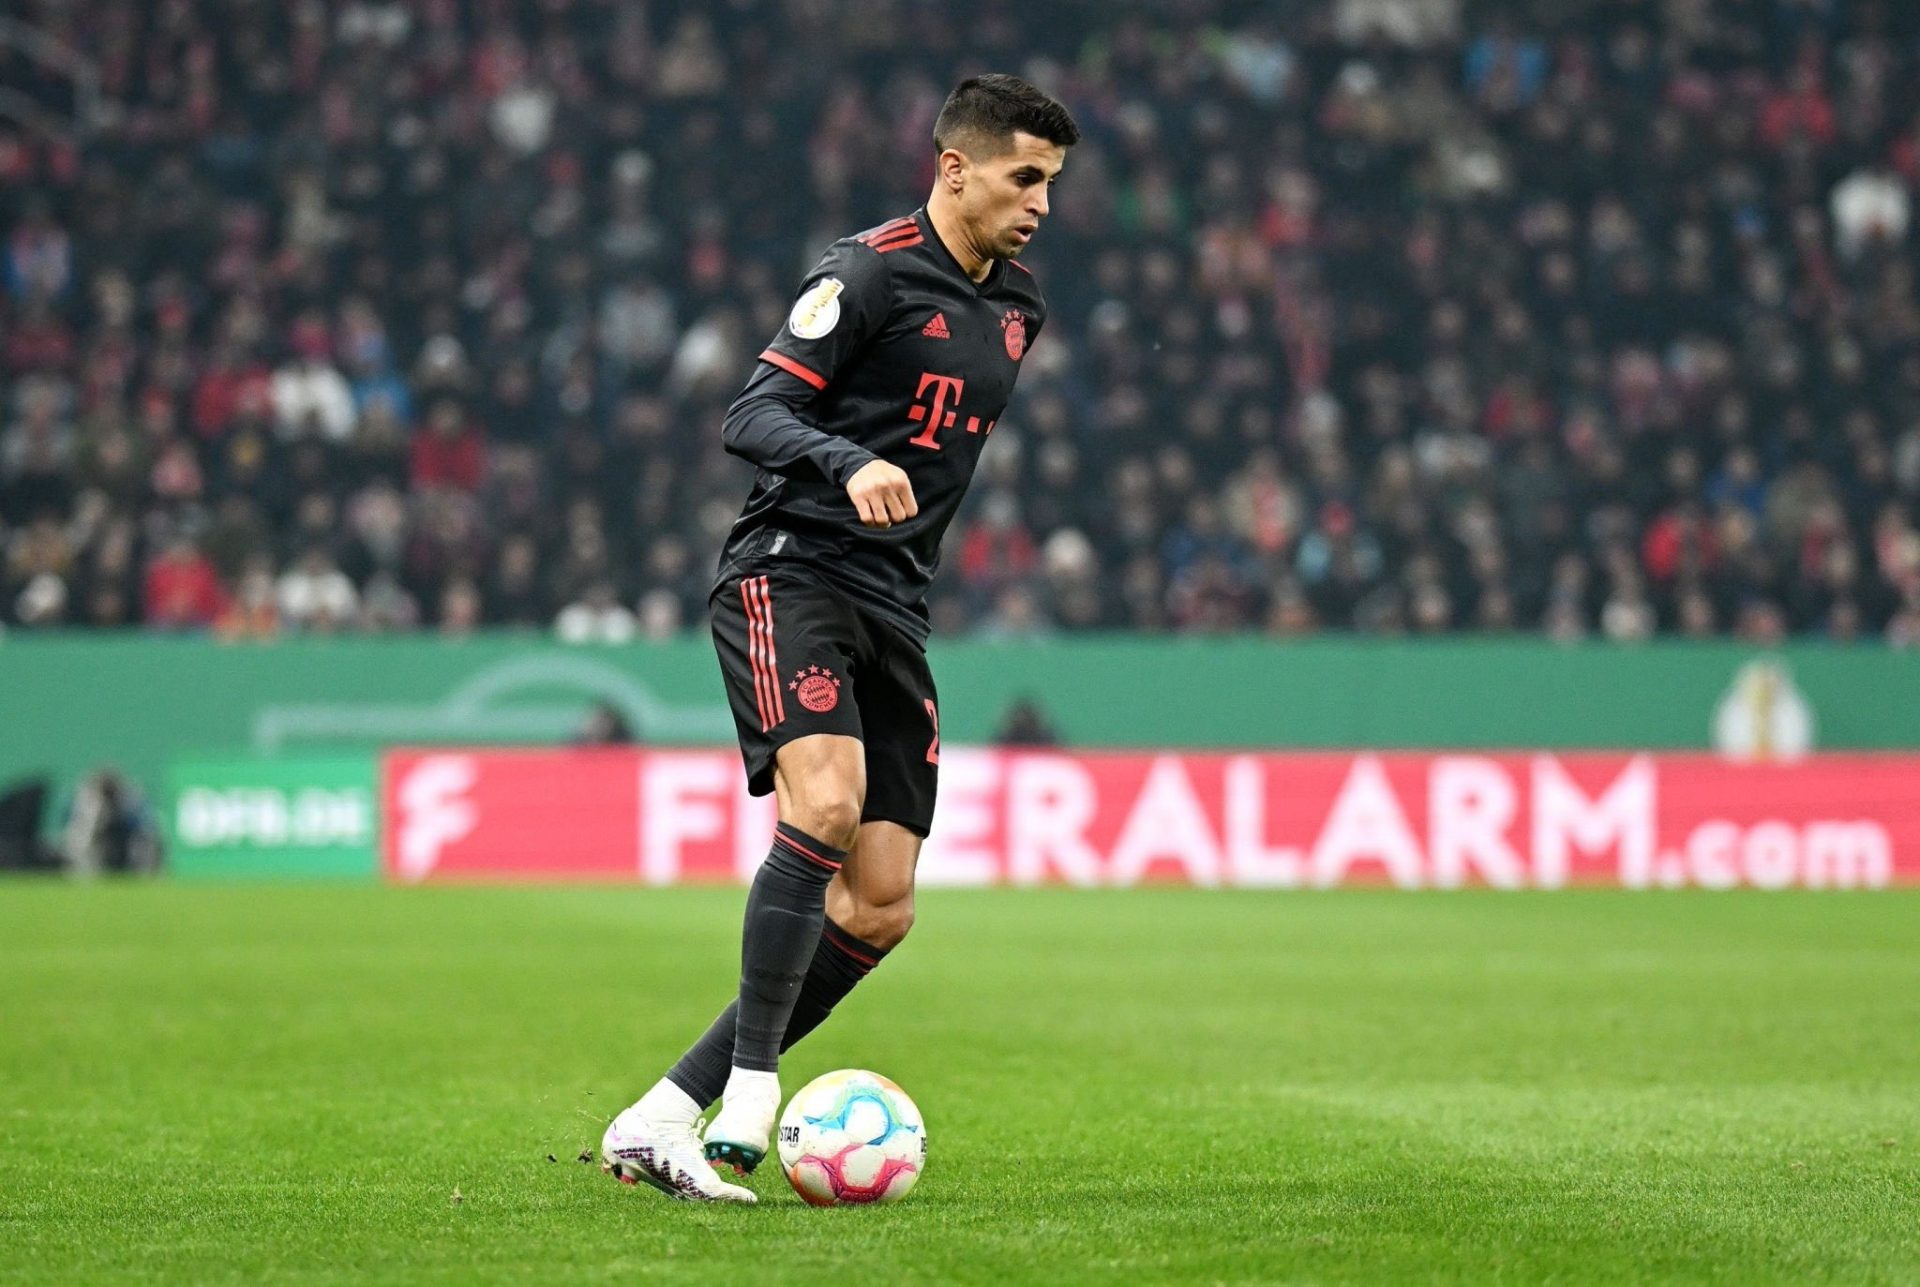 Joao Cancelo gets an assist on his Bayern debut!